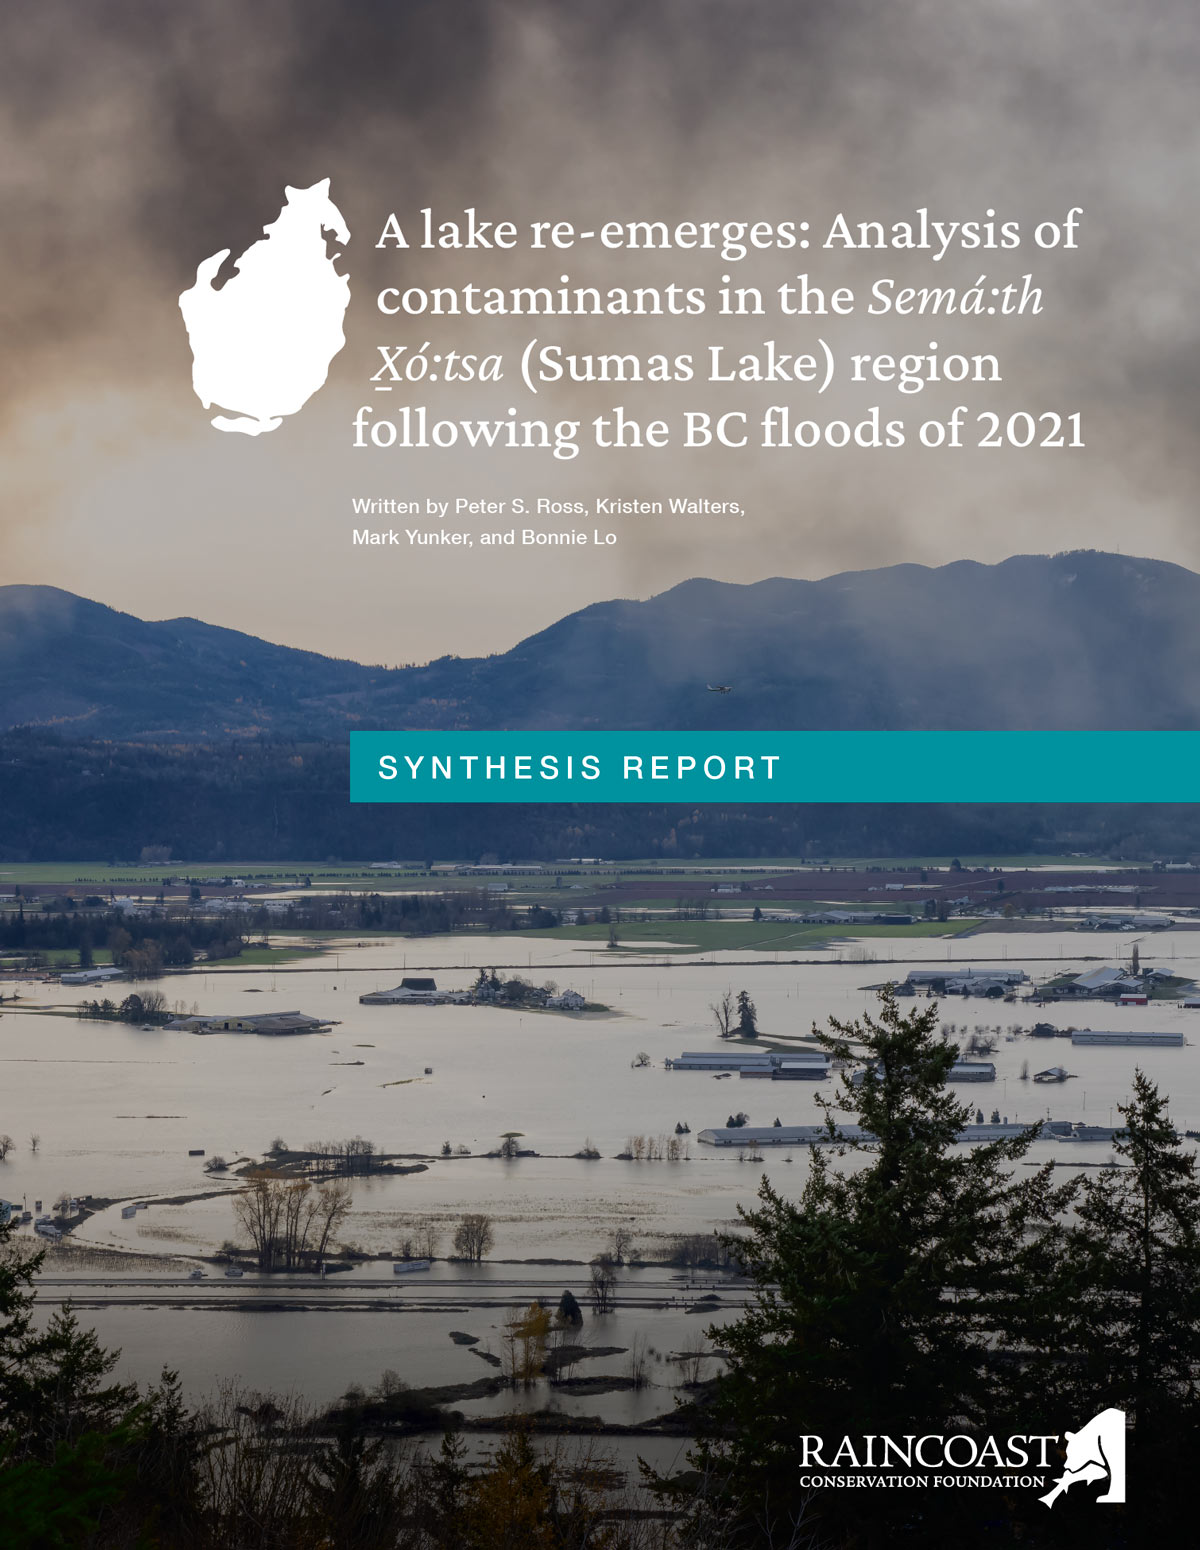 Synthesis report cover: A lake re-emerges: Analysis of contaminants in the Semá:th X̱ó:tsa (Sumas Lake) region following the BC floods of 2021.